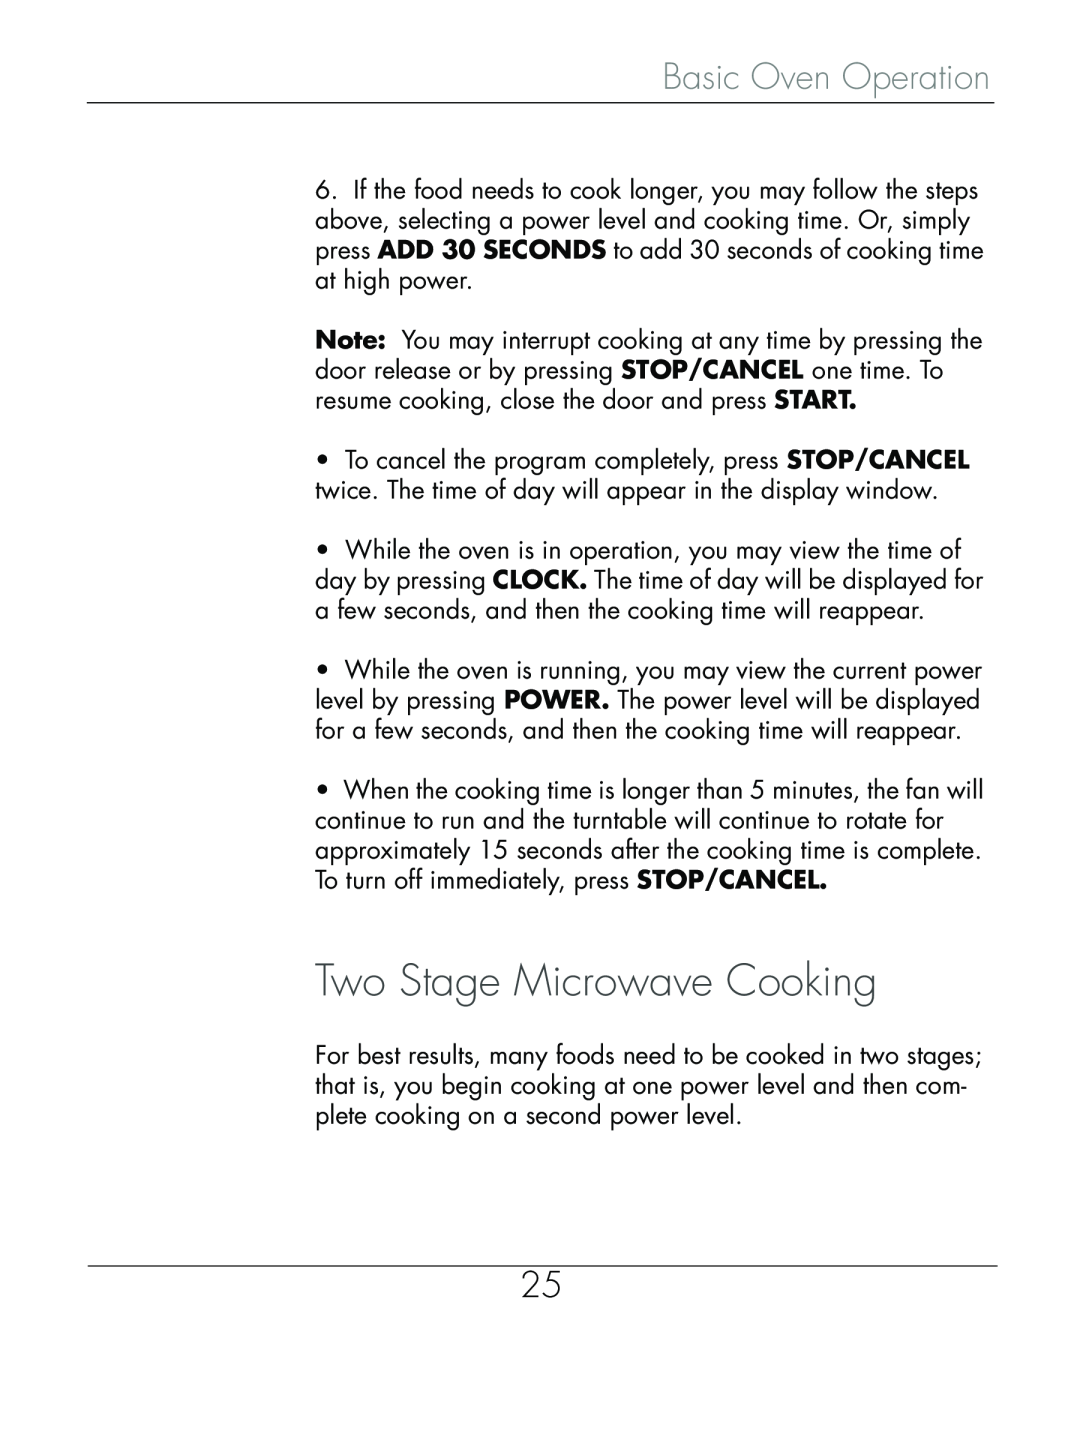 Beyond Microwace Oven manual Two Stage Microwave Cooking, Basic Oven Operation 